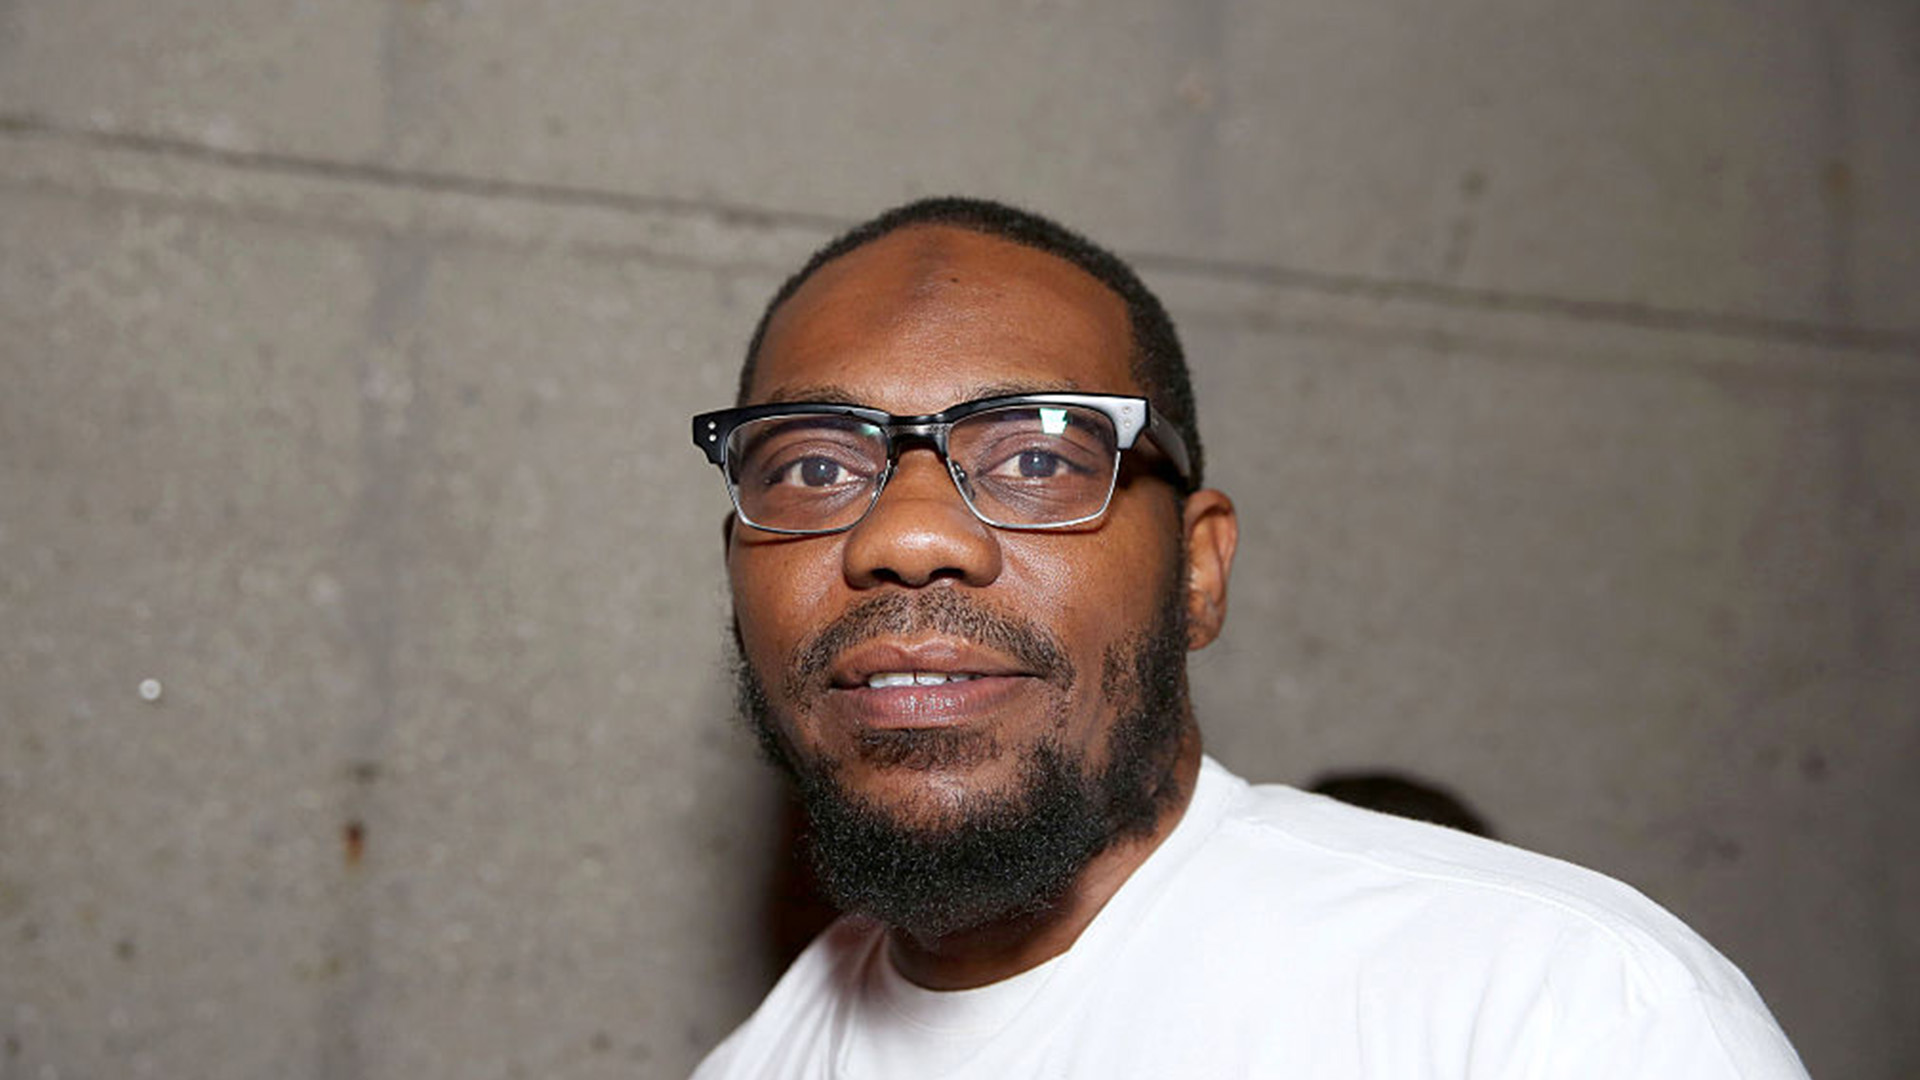 Beanie Sigel Says His Next Album Will Use Artificial Intelligence To Bring His Old Voice Back